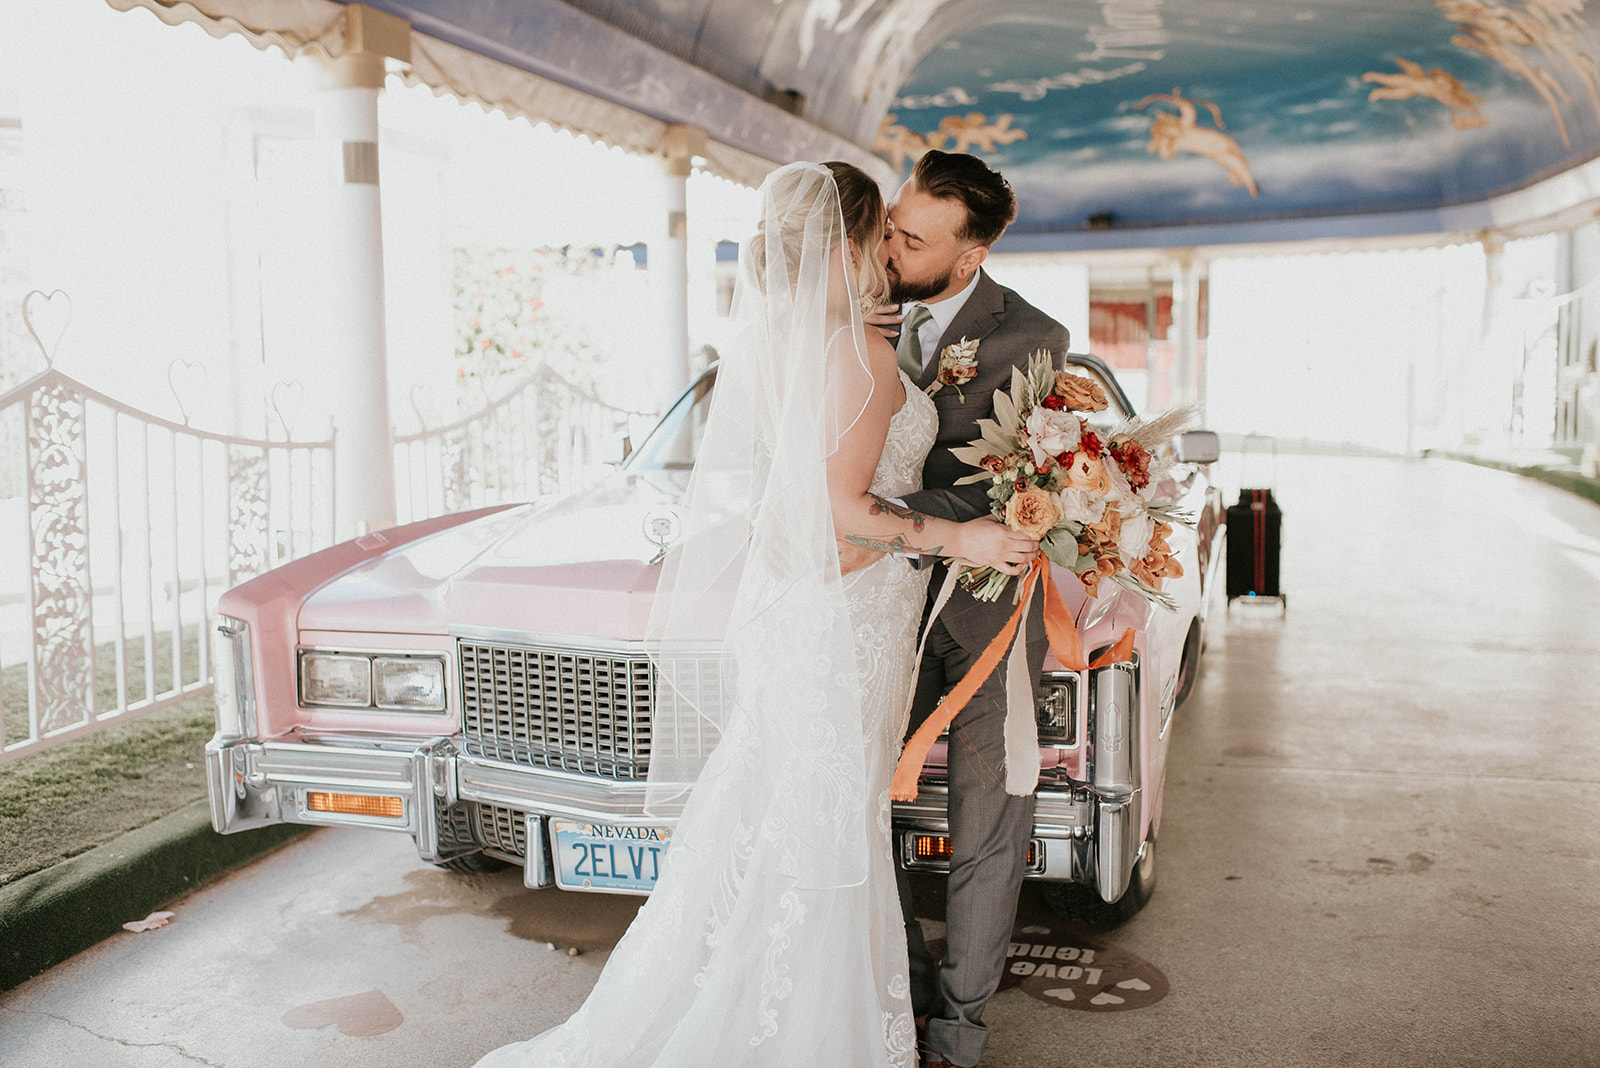 First Stop! A Little White Chapel sharing a kiss at the front of bright pink Cadillac. Veil cascading down the brides soft curled updo. Orange ribbon flowing in wind with boho styled bouquet. 